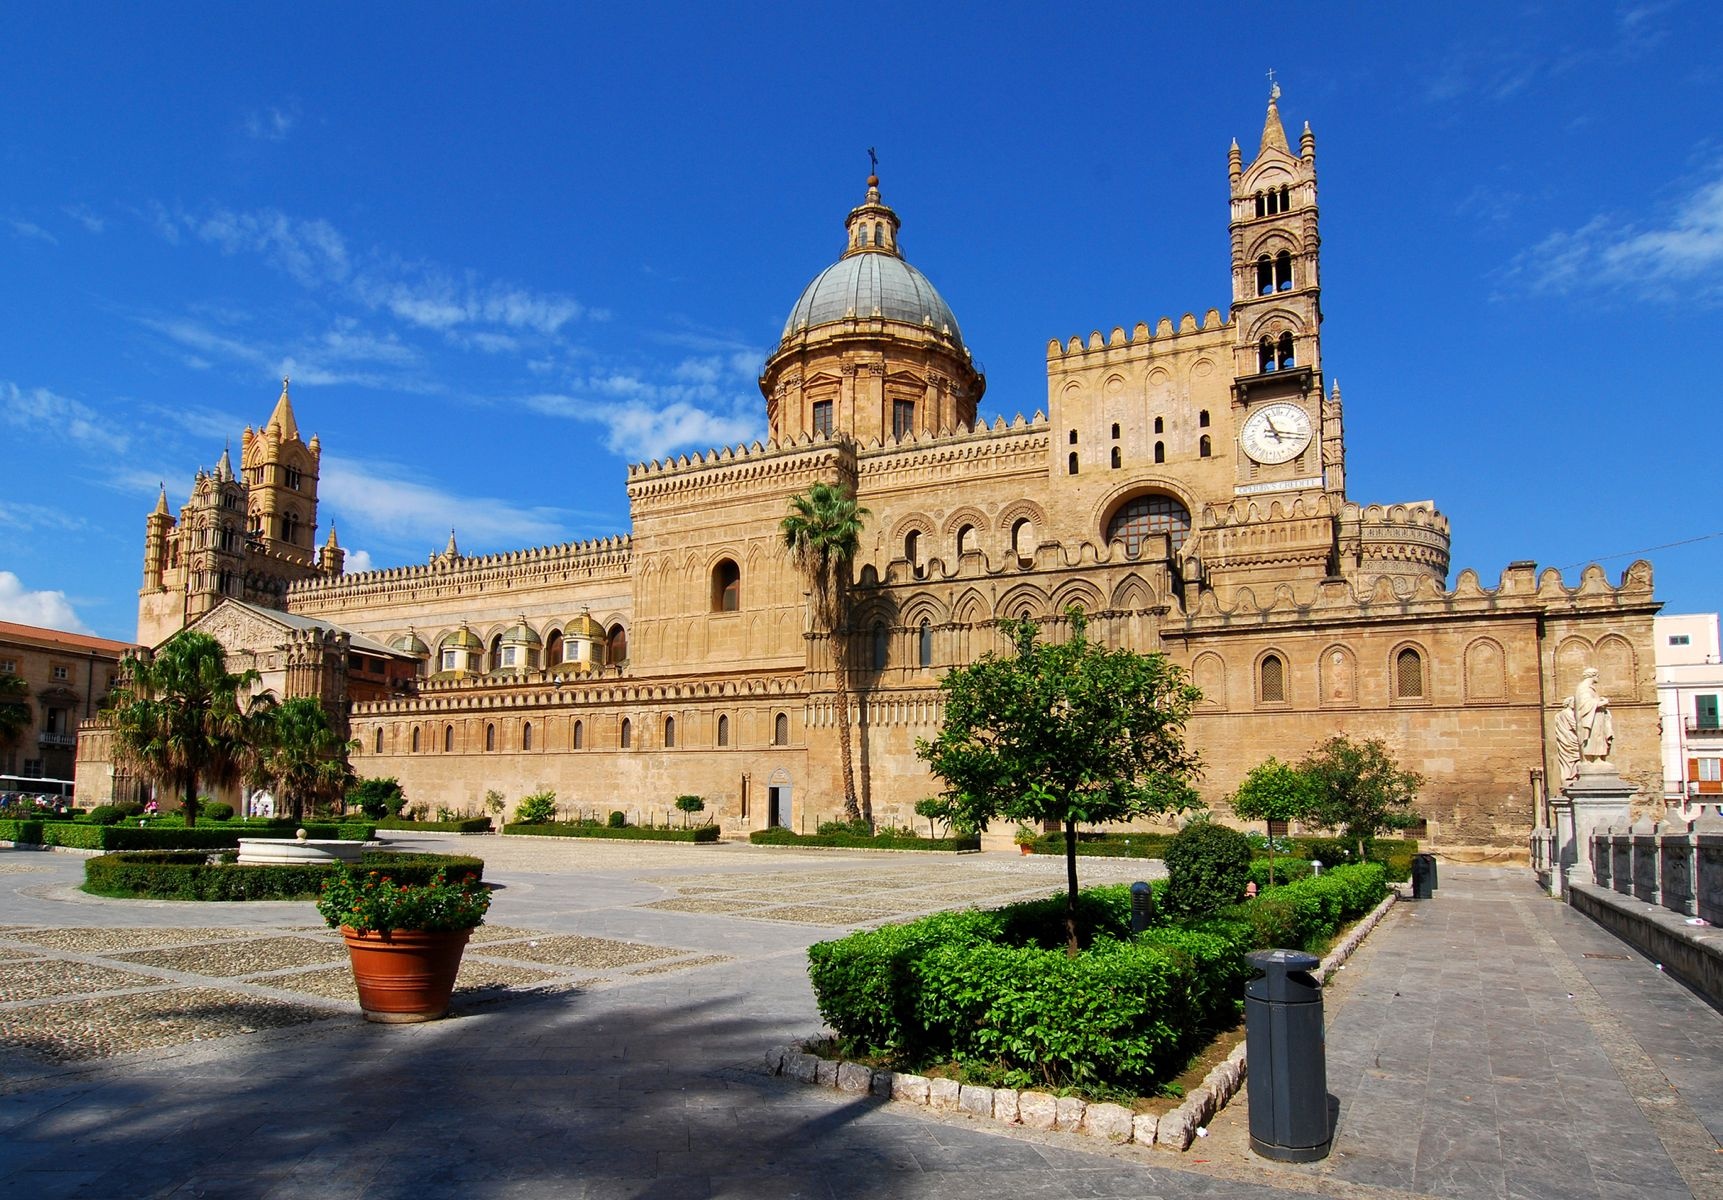 3-Hour Small Group Tour to Admire the Best Attractions in Palermo: Square of Shame | Piazza Pretoria  | Praetorian Palace | Town Hall |